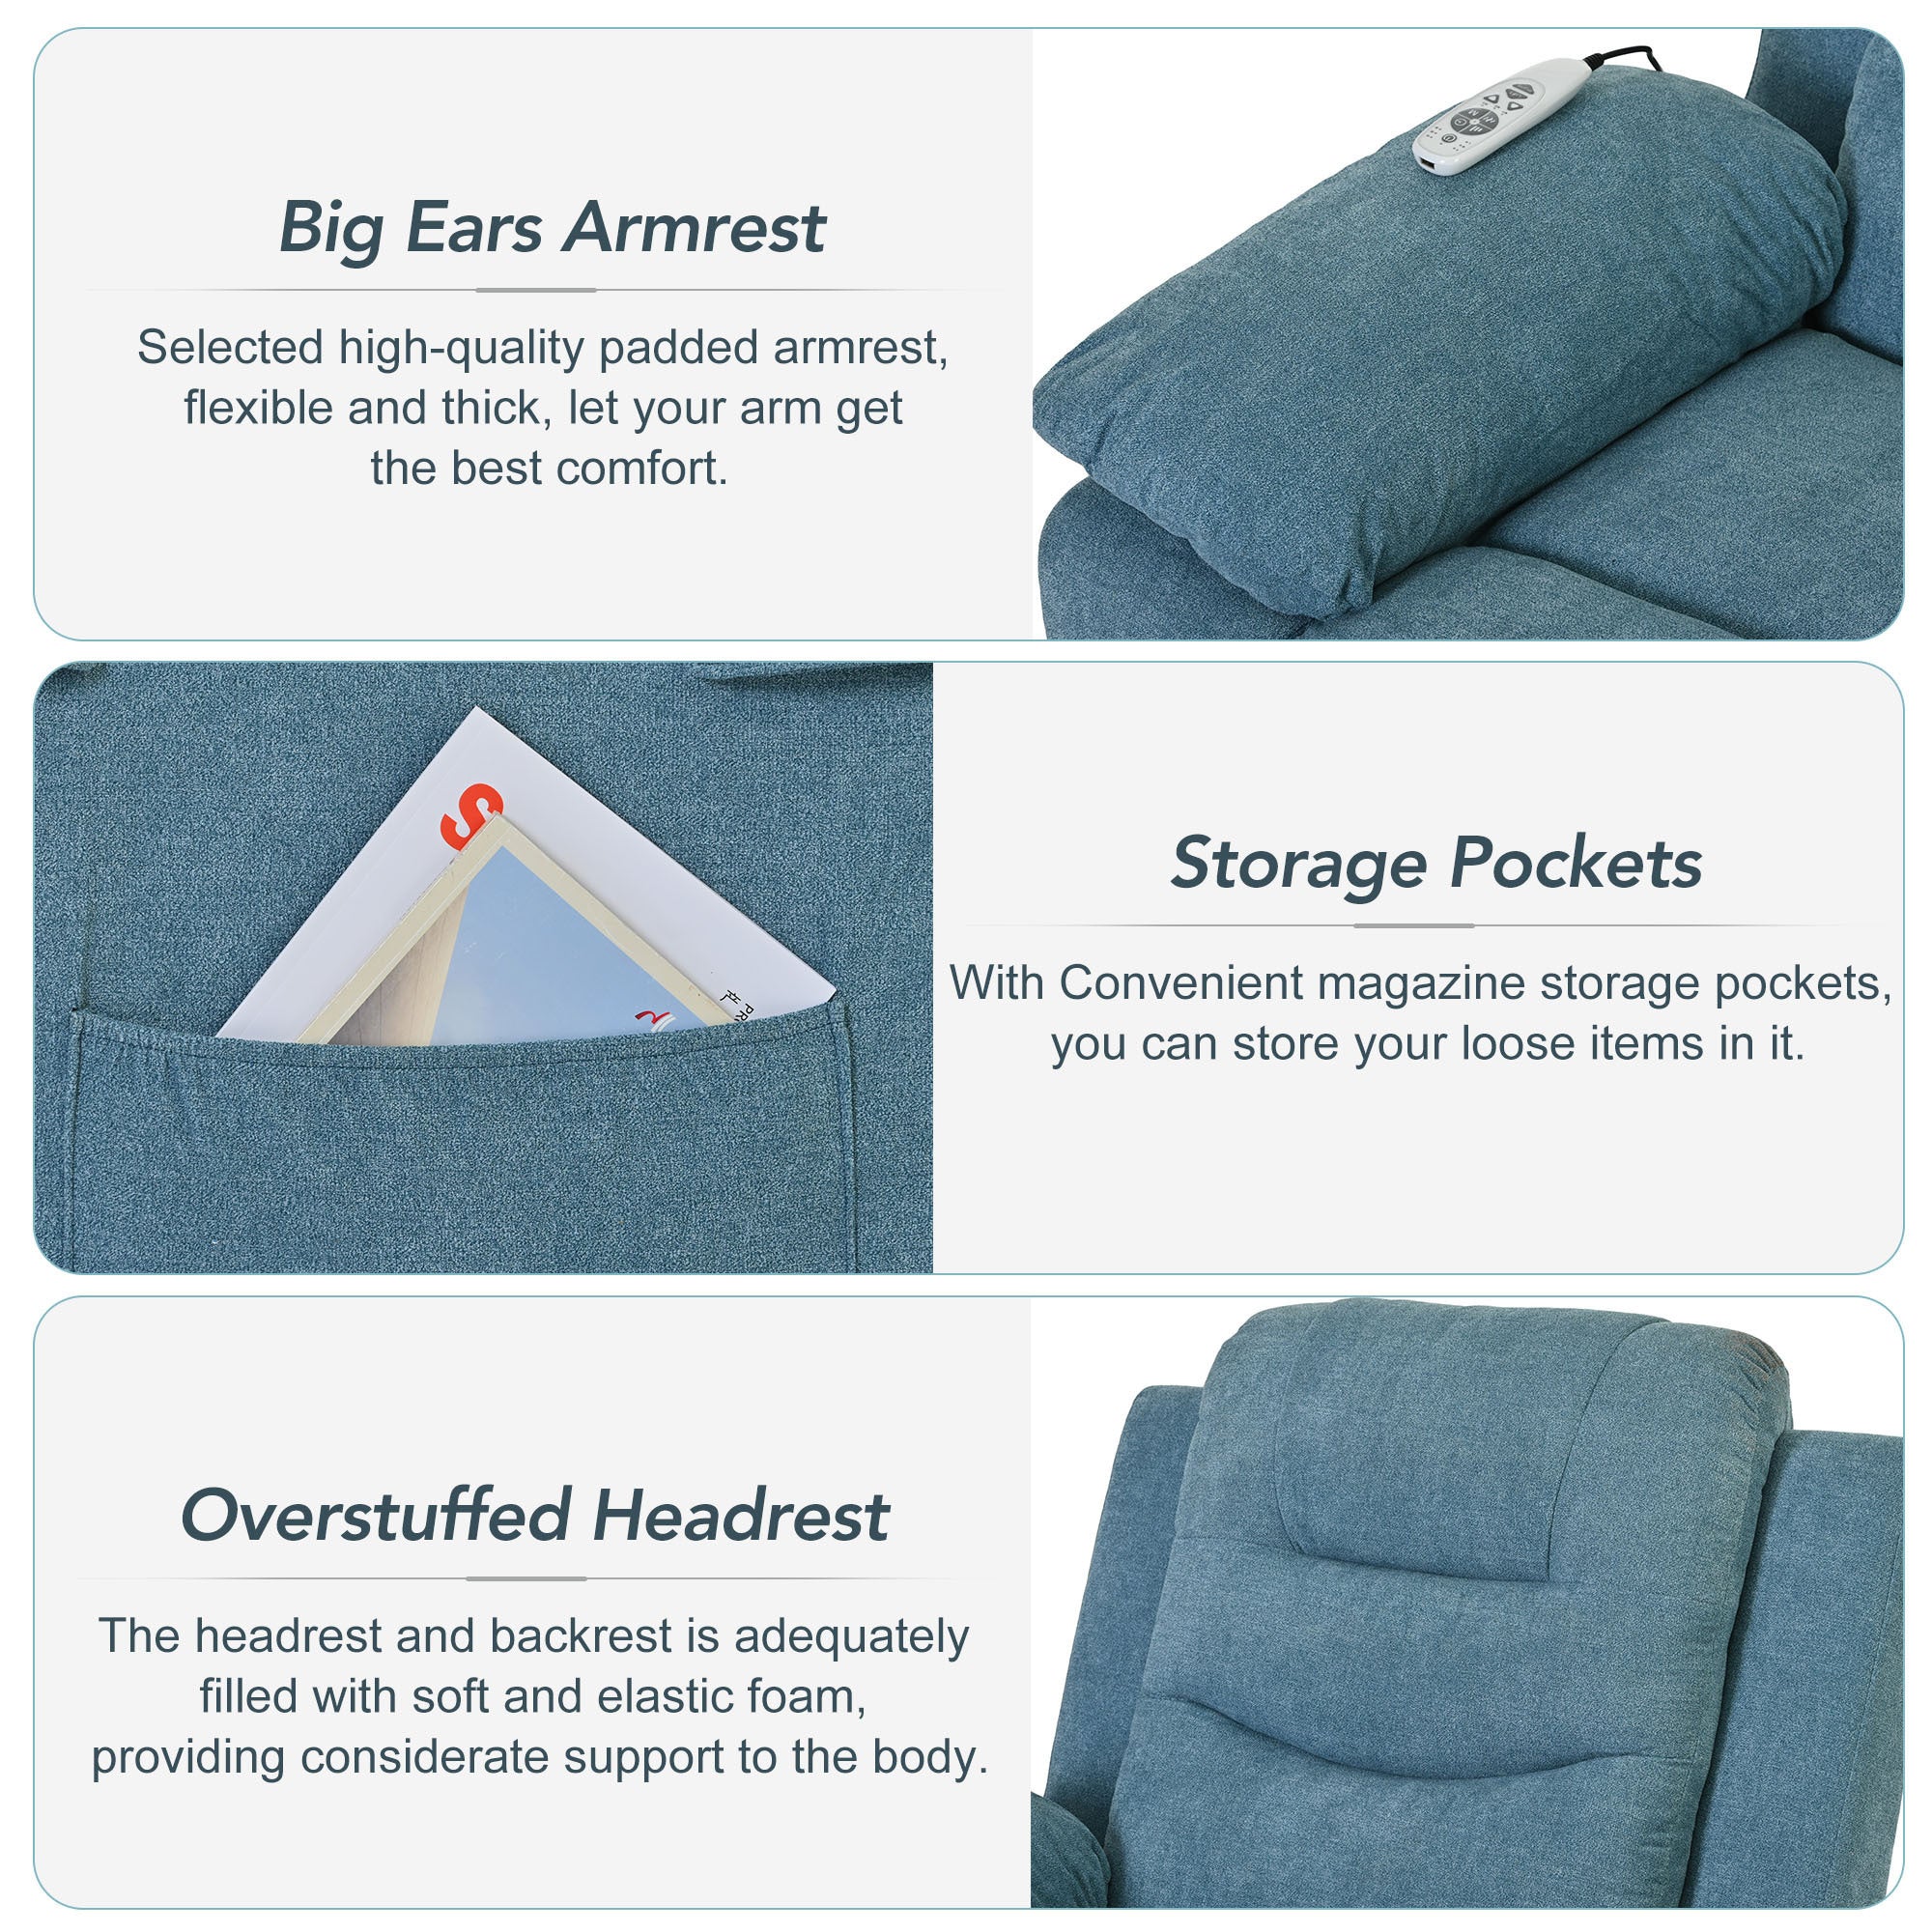 Blue Power Lift Chair Features: Storage Pockets, Big Armrests and Overstuffed Headrest